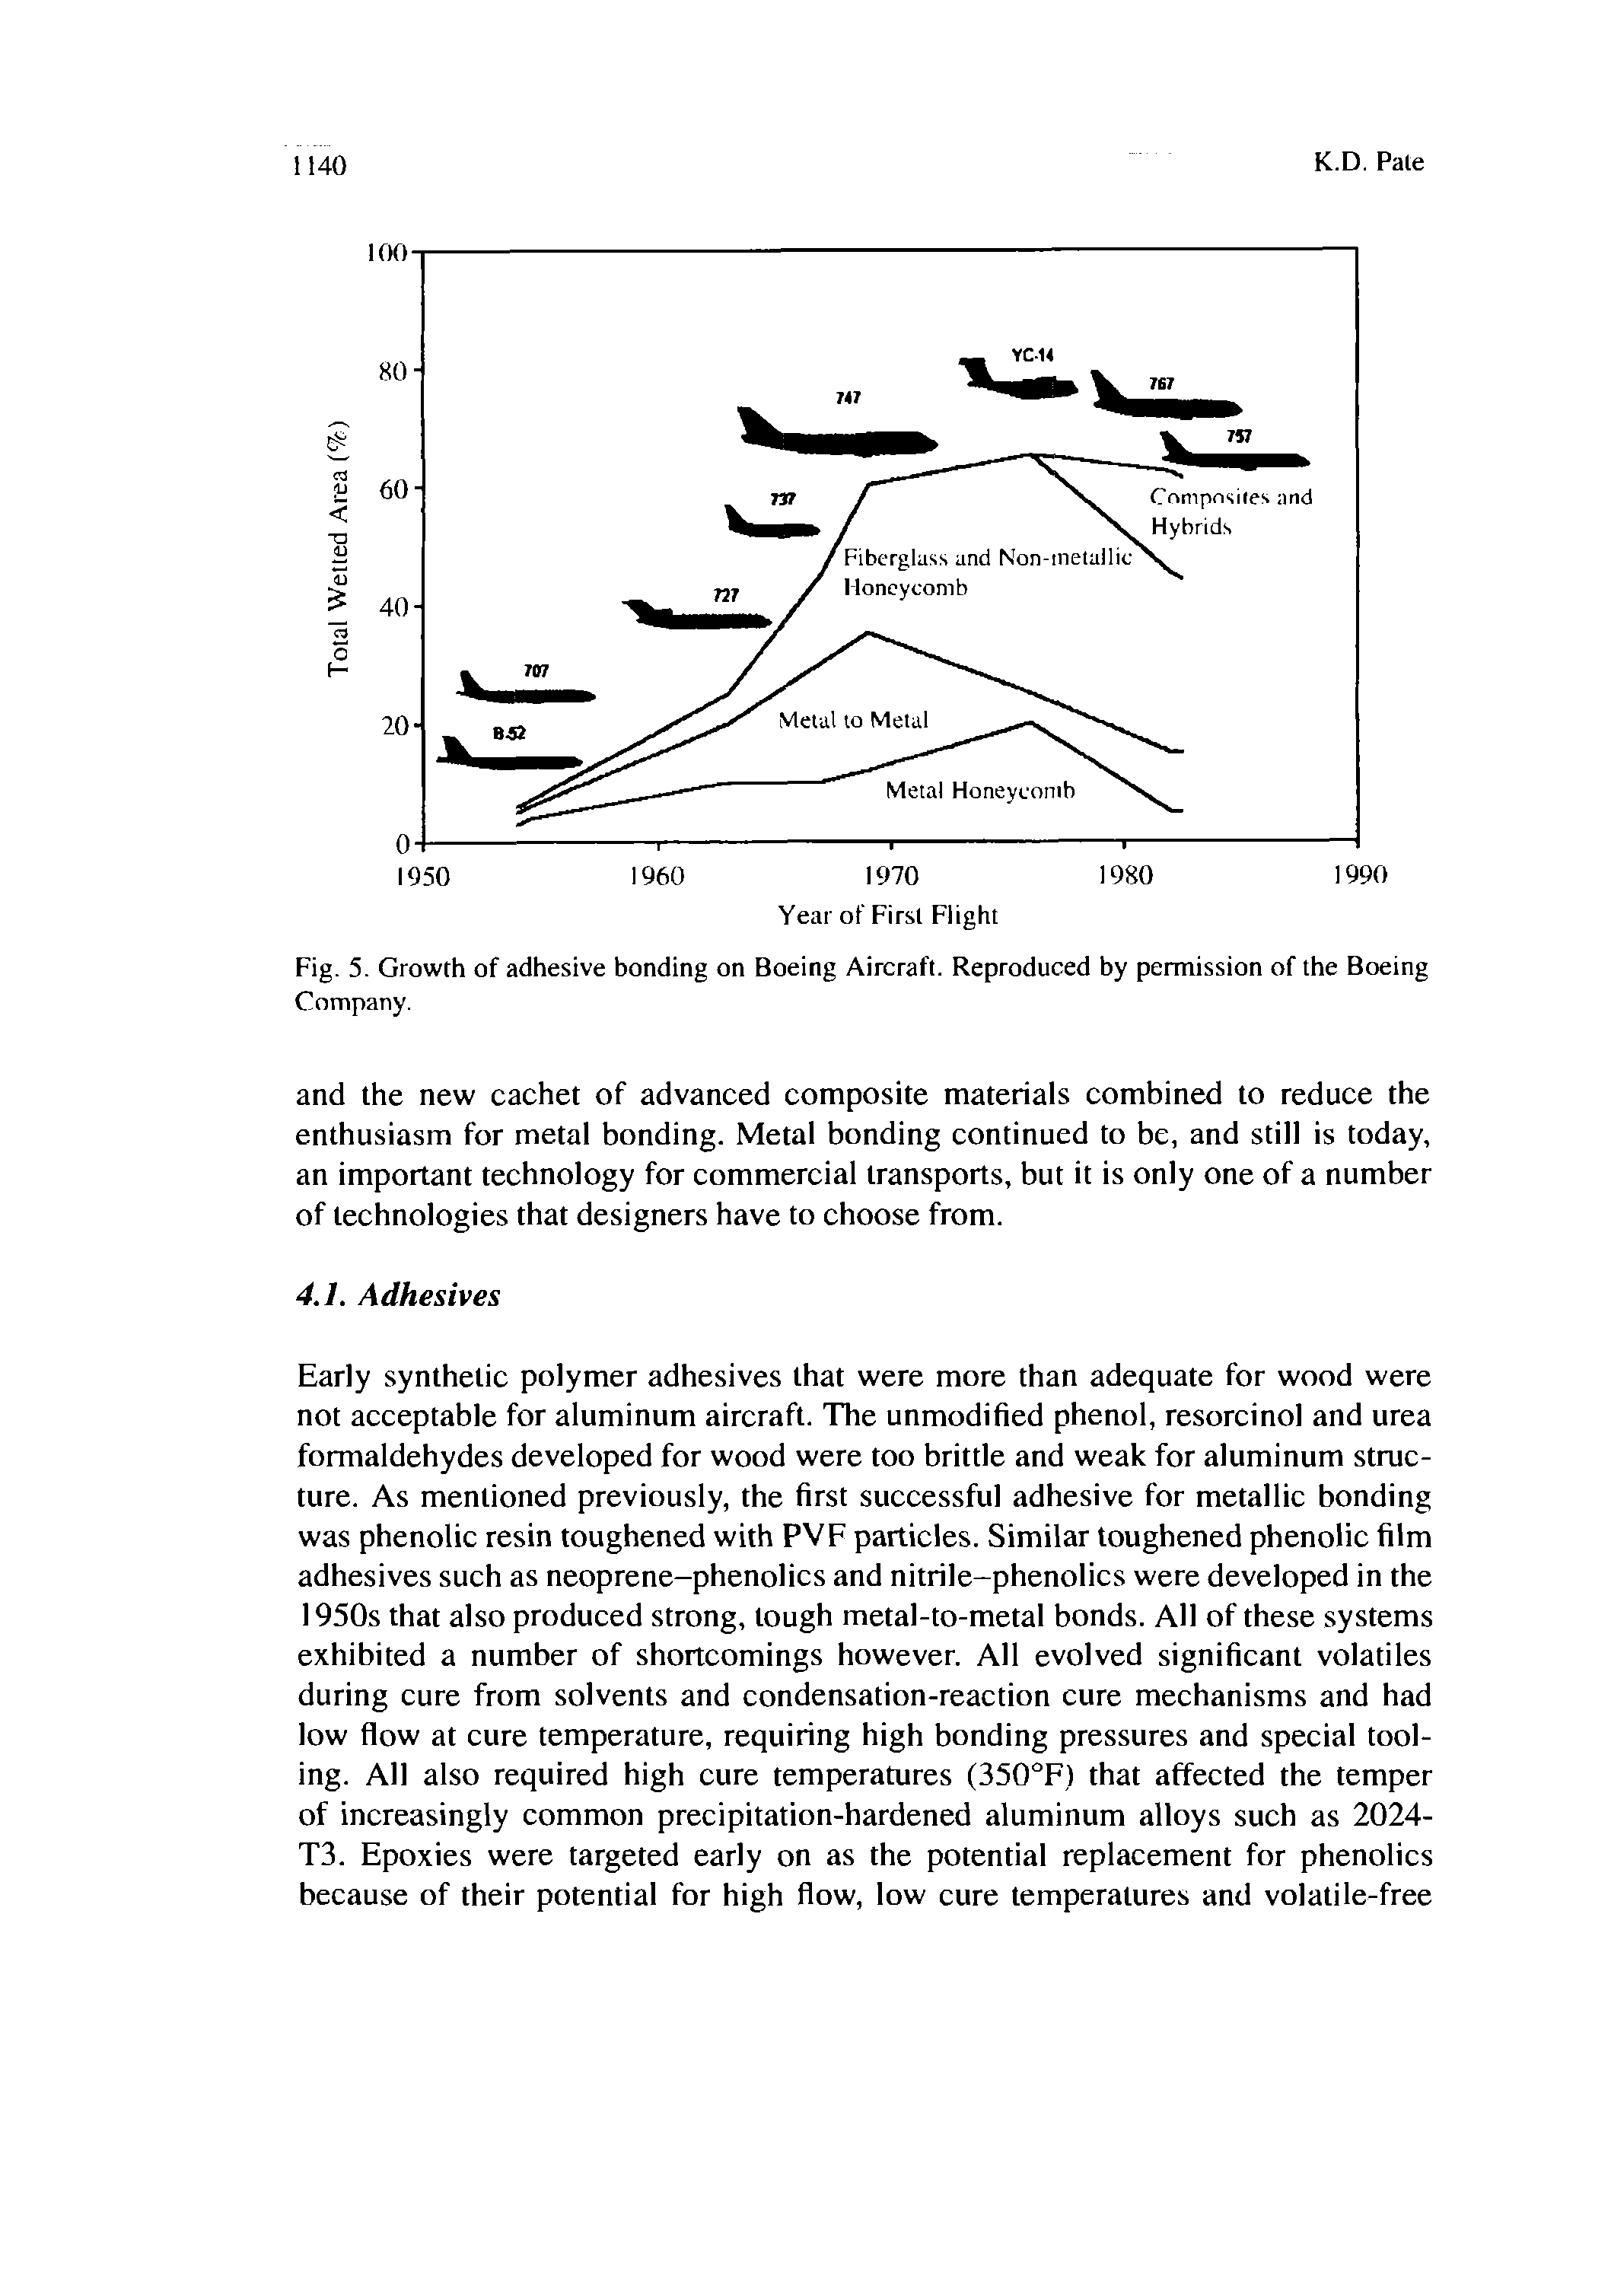 Fig. 5. Growth of adhesive bonding on Boeing Aircraft. Reproduced by permission of the Boeing Company.